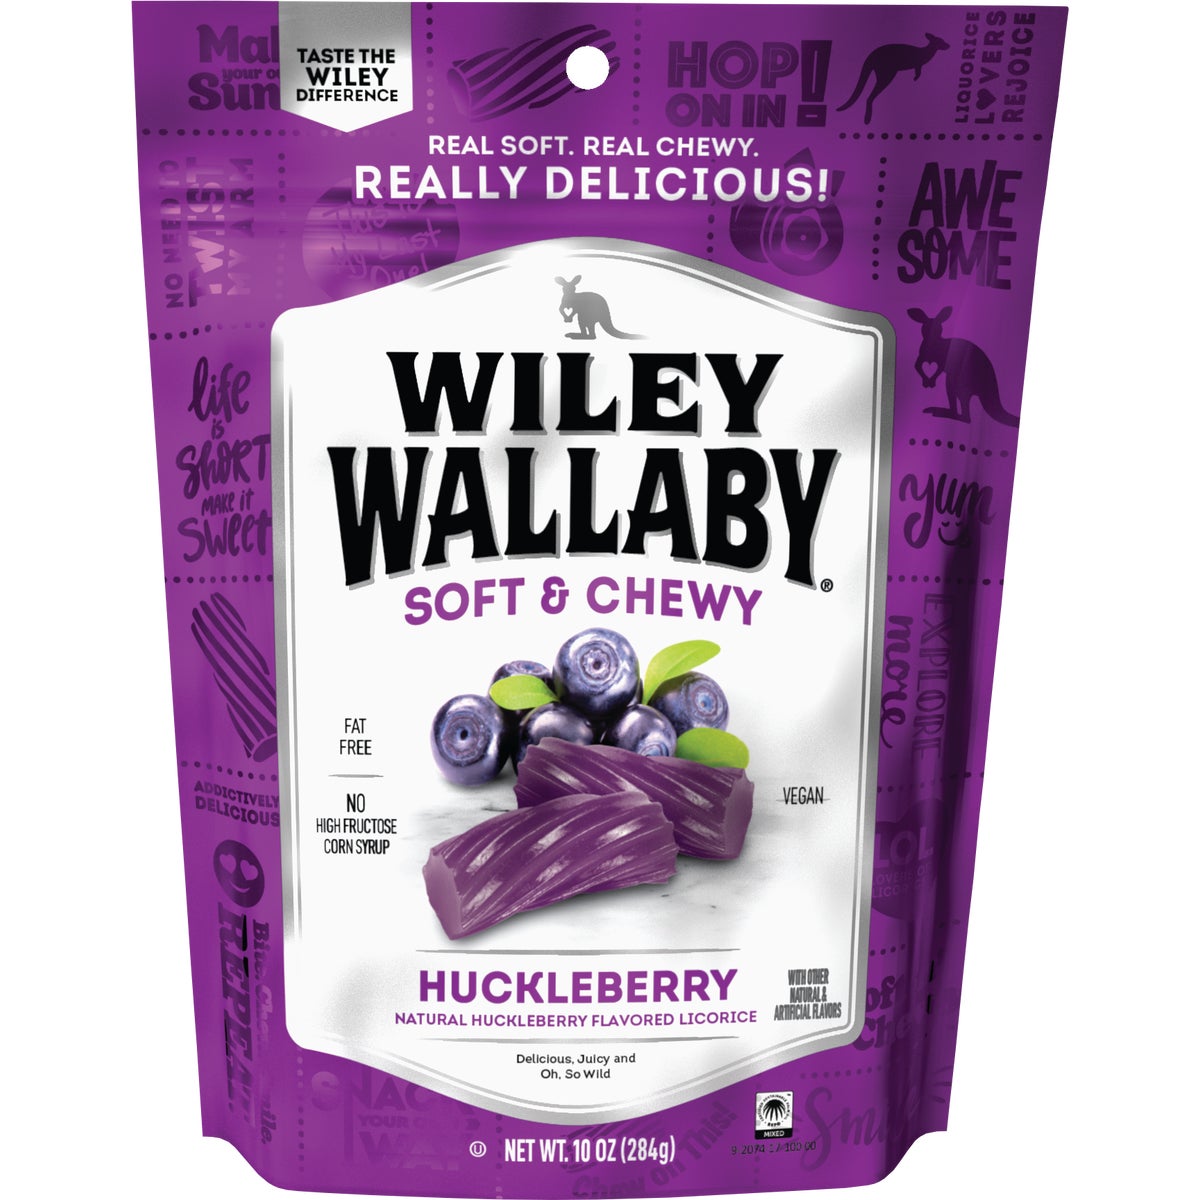 Wiley Wallaby Huckleberry Licorice 10 Oz. Candy